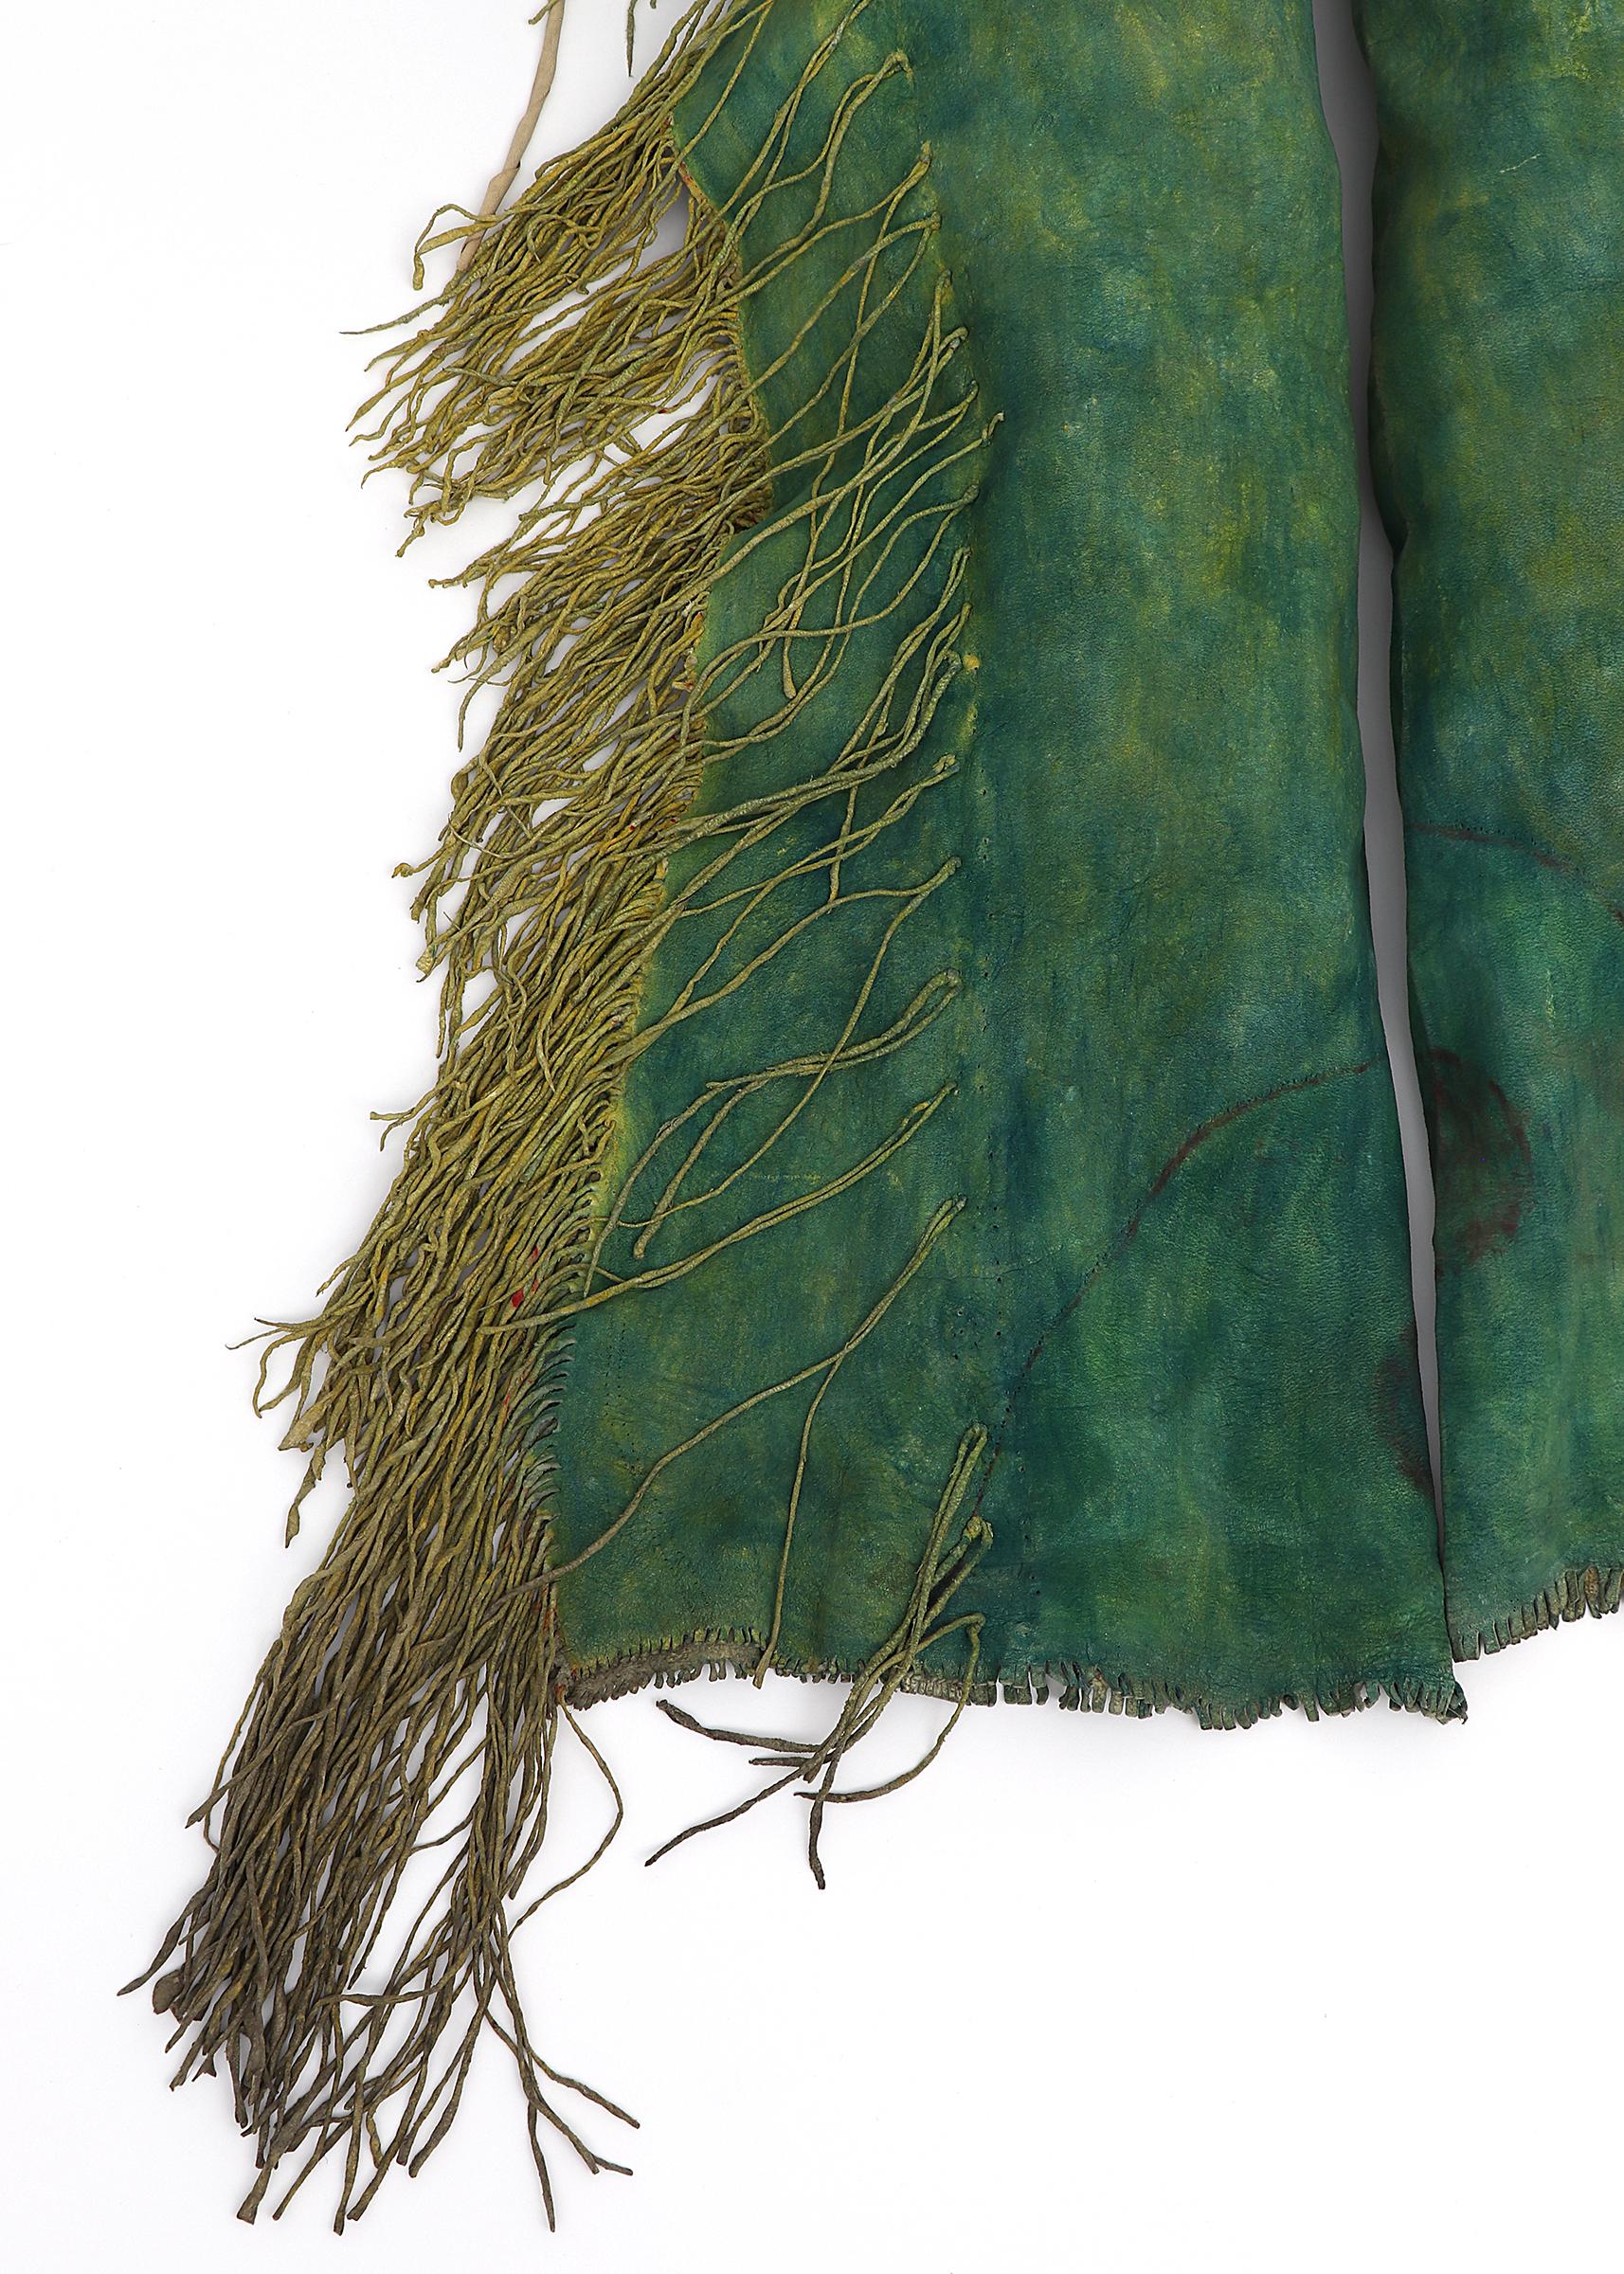 Museum quality Southern Arapaho (Hinono’ei) Native American Plains Indian leggings circa 1880s.  Constructed of dyed native tanned hide with viridian green dye and ochre yellow embellished with glass trade beads. The hide is soft and flexible and